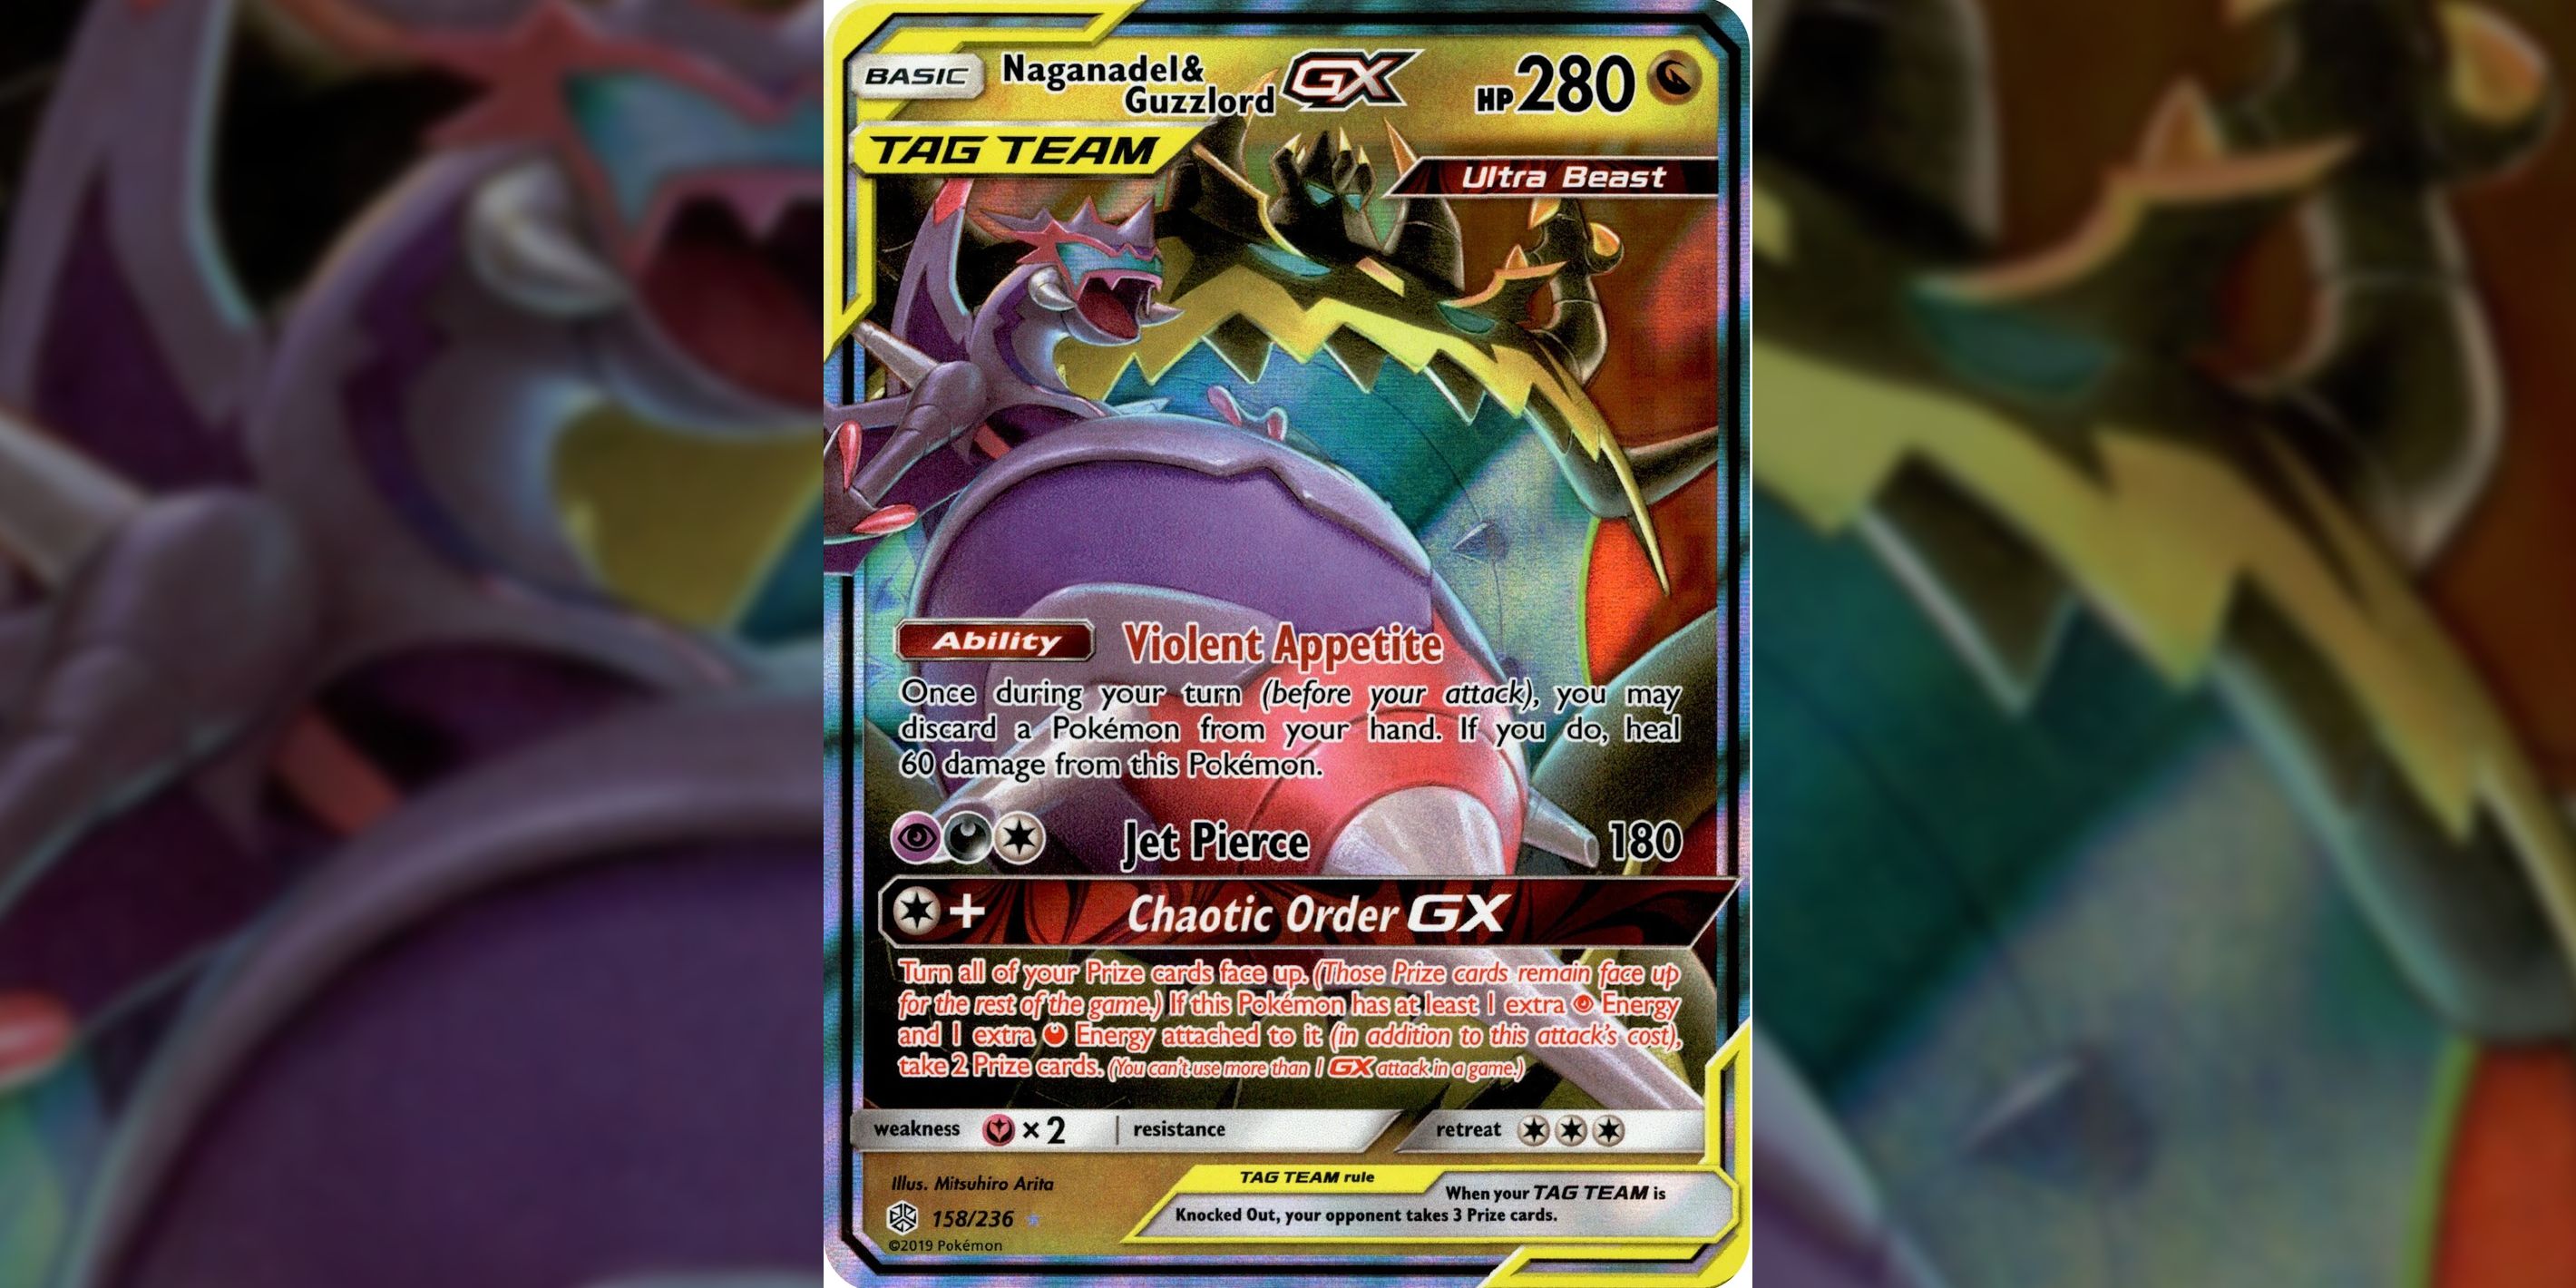 2 ultra beasts on the same card.